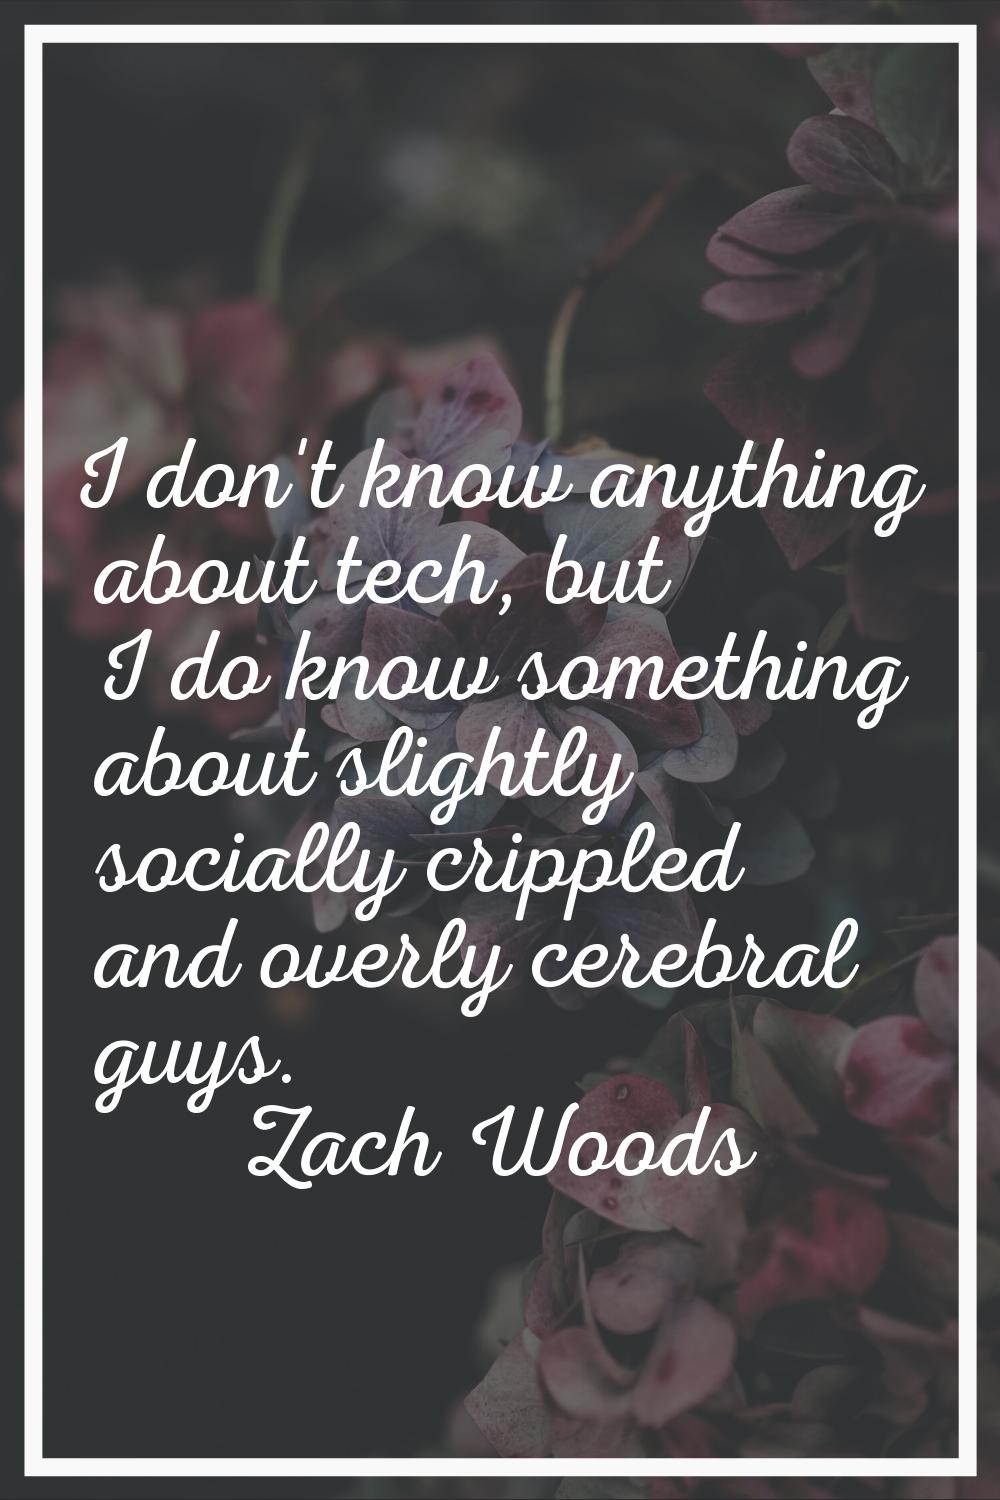 I don't know anything about tech, but I do know something about slightly socially crippled and over